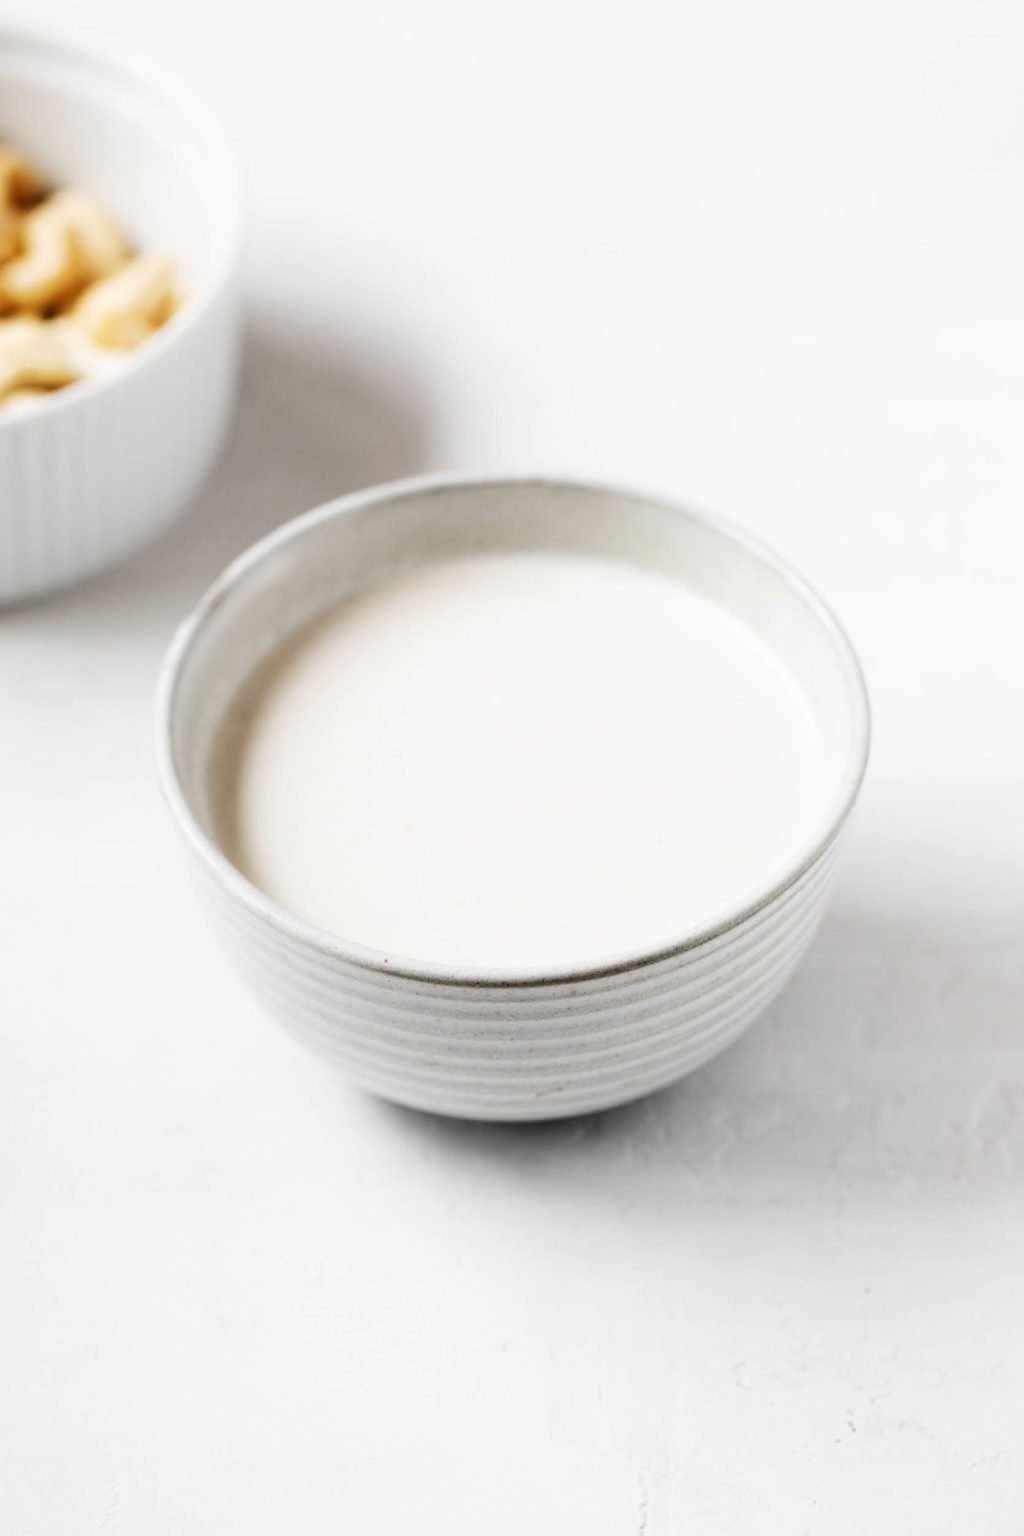 A round bowl has been filled with a creamy, white cashew cream. Raw cashews are placed in a ramekin nearby.